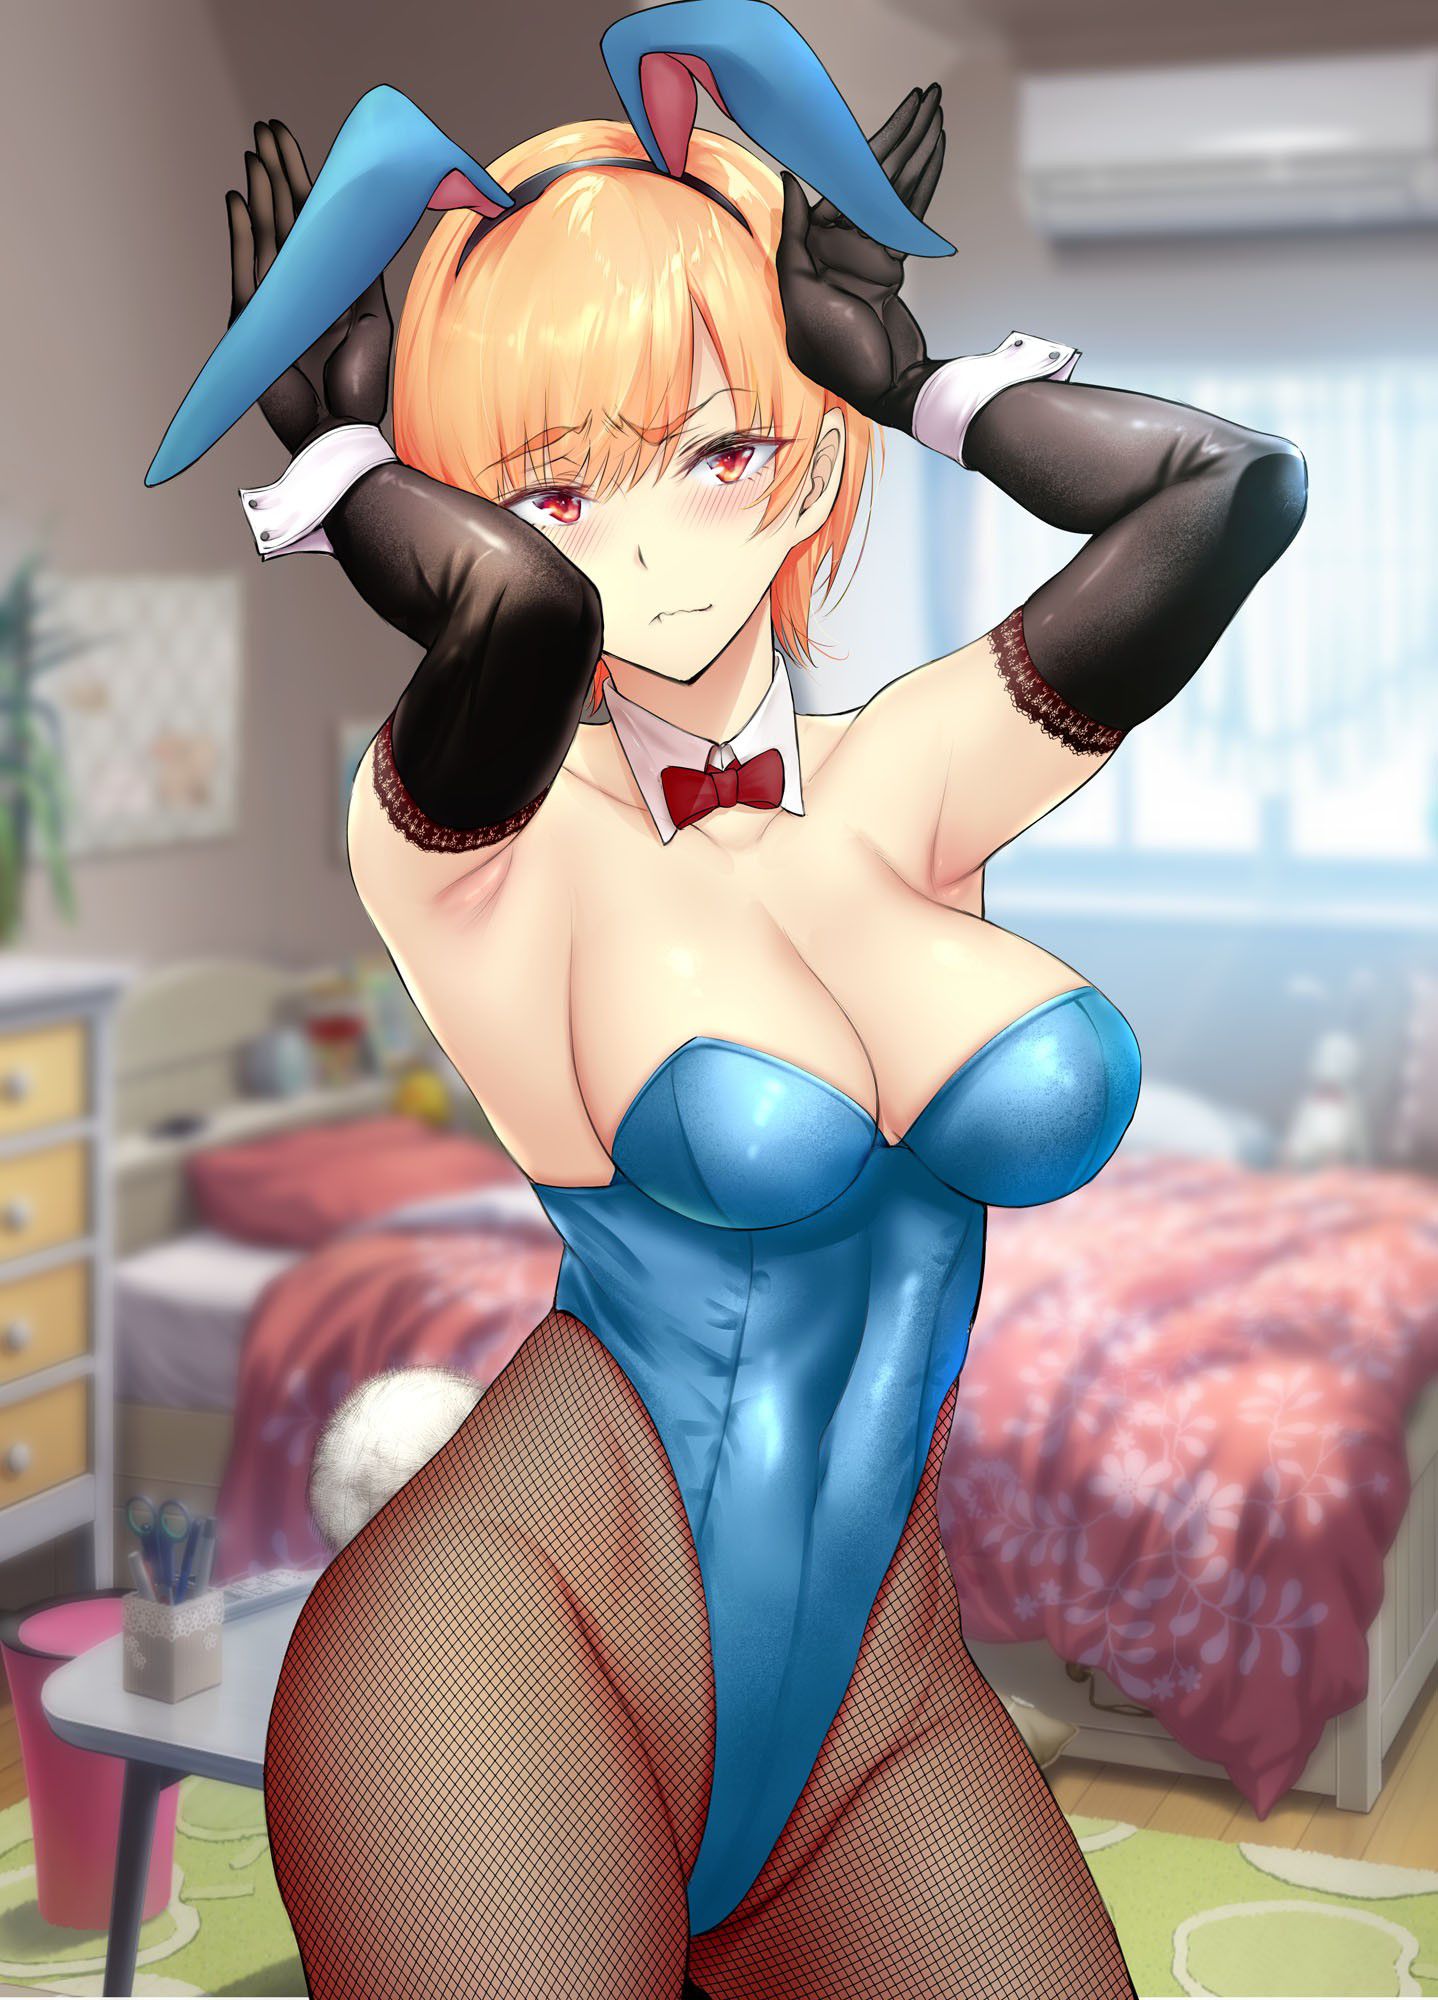 [Secondary] erotic image of a girl in bunny girl figure 27